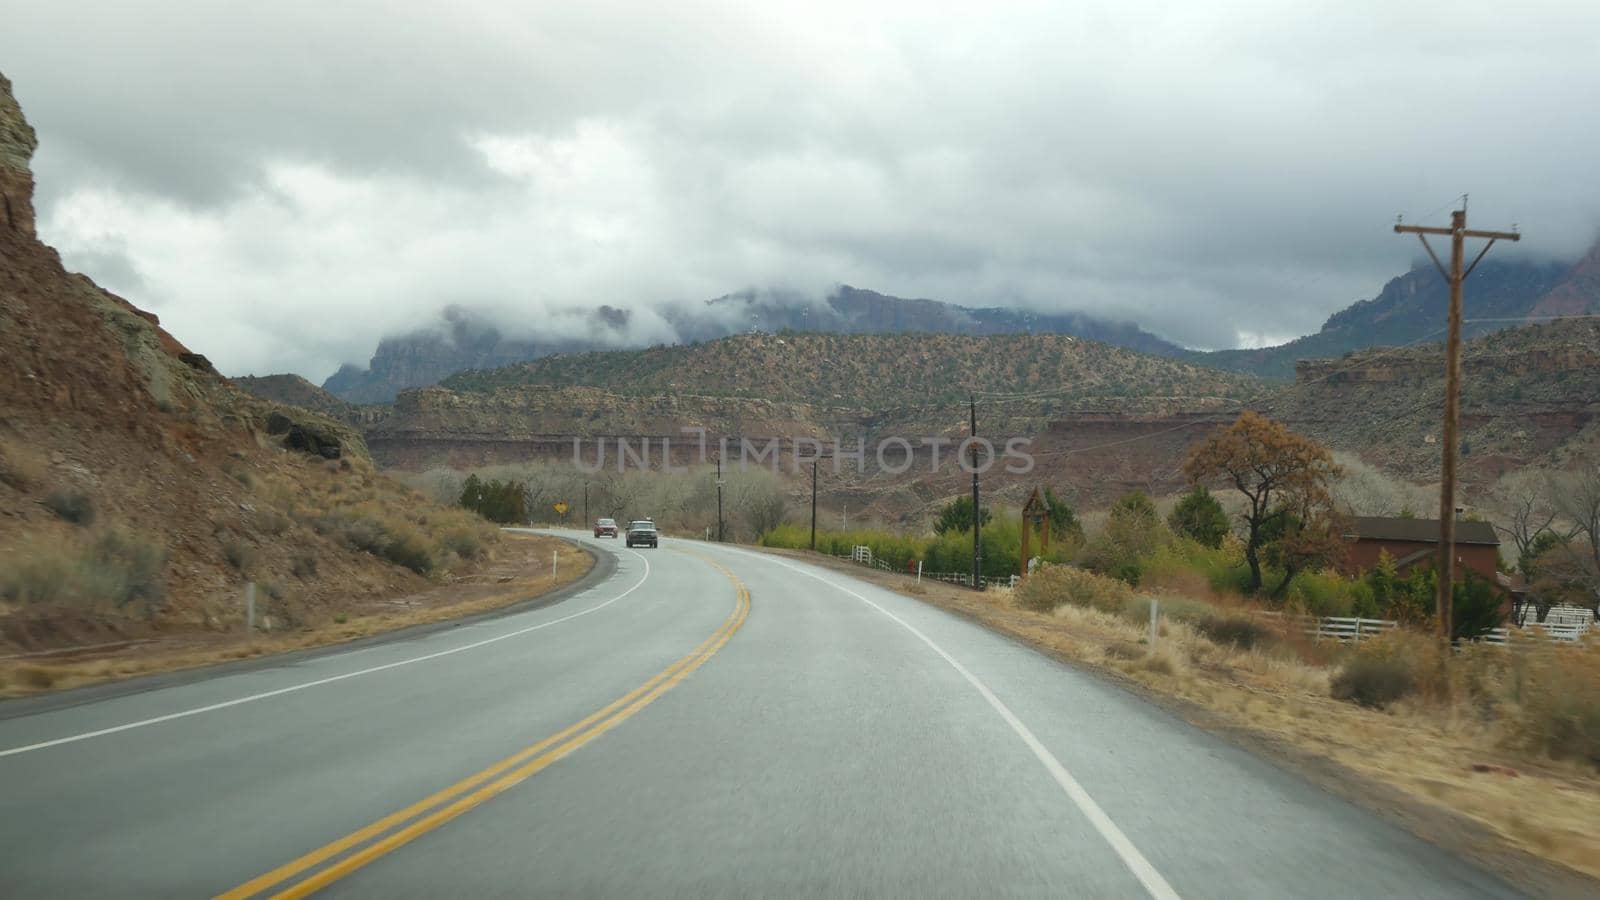 Road trip, driving auto in Zion Canyon, Utah, USA. Hitchhiking traveling in America, autumn journey. Red alien steep cliffs, rain and bare trees. Foggy weather and calm fall atmosphere. View from car.